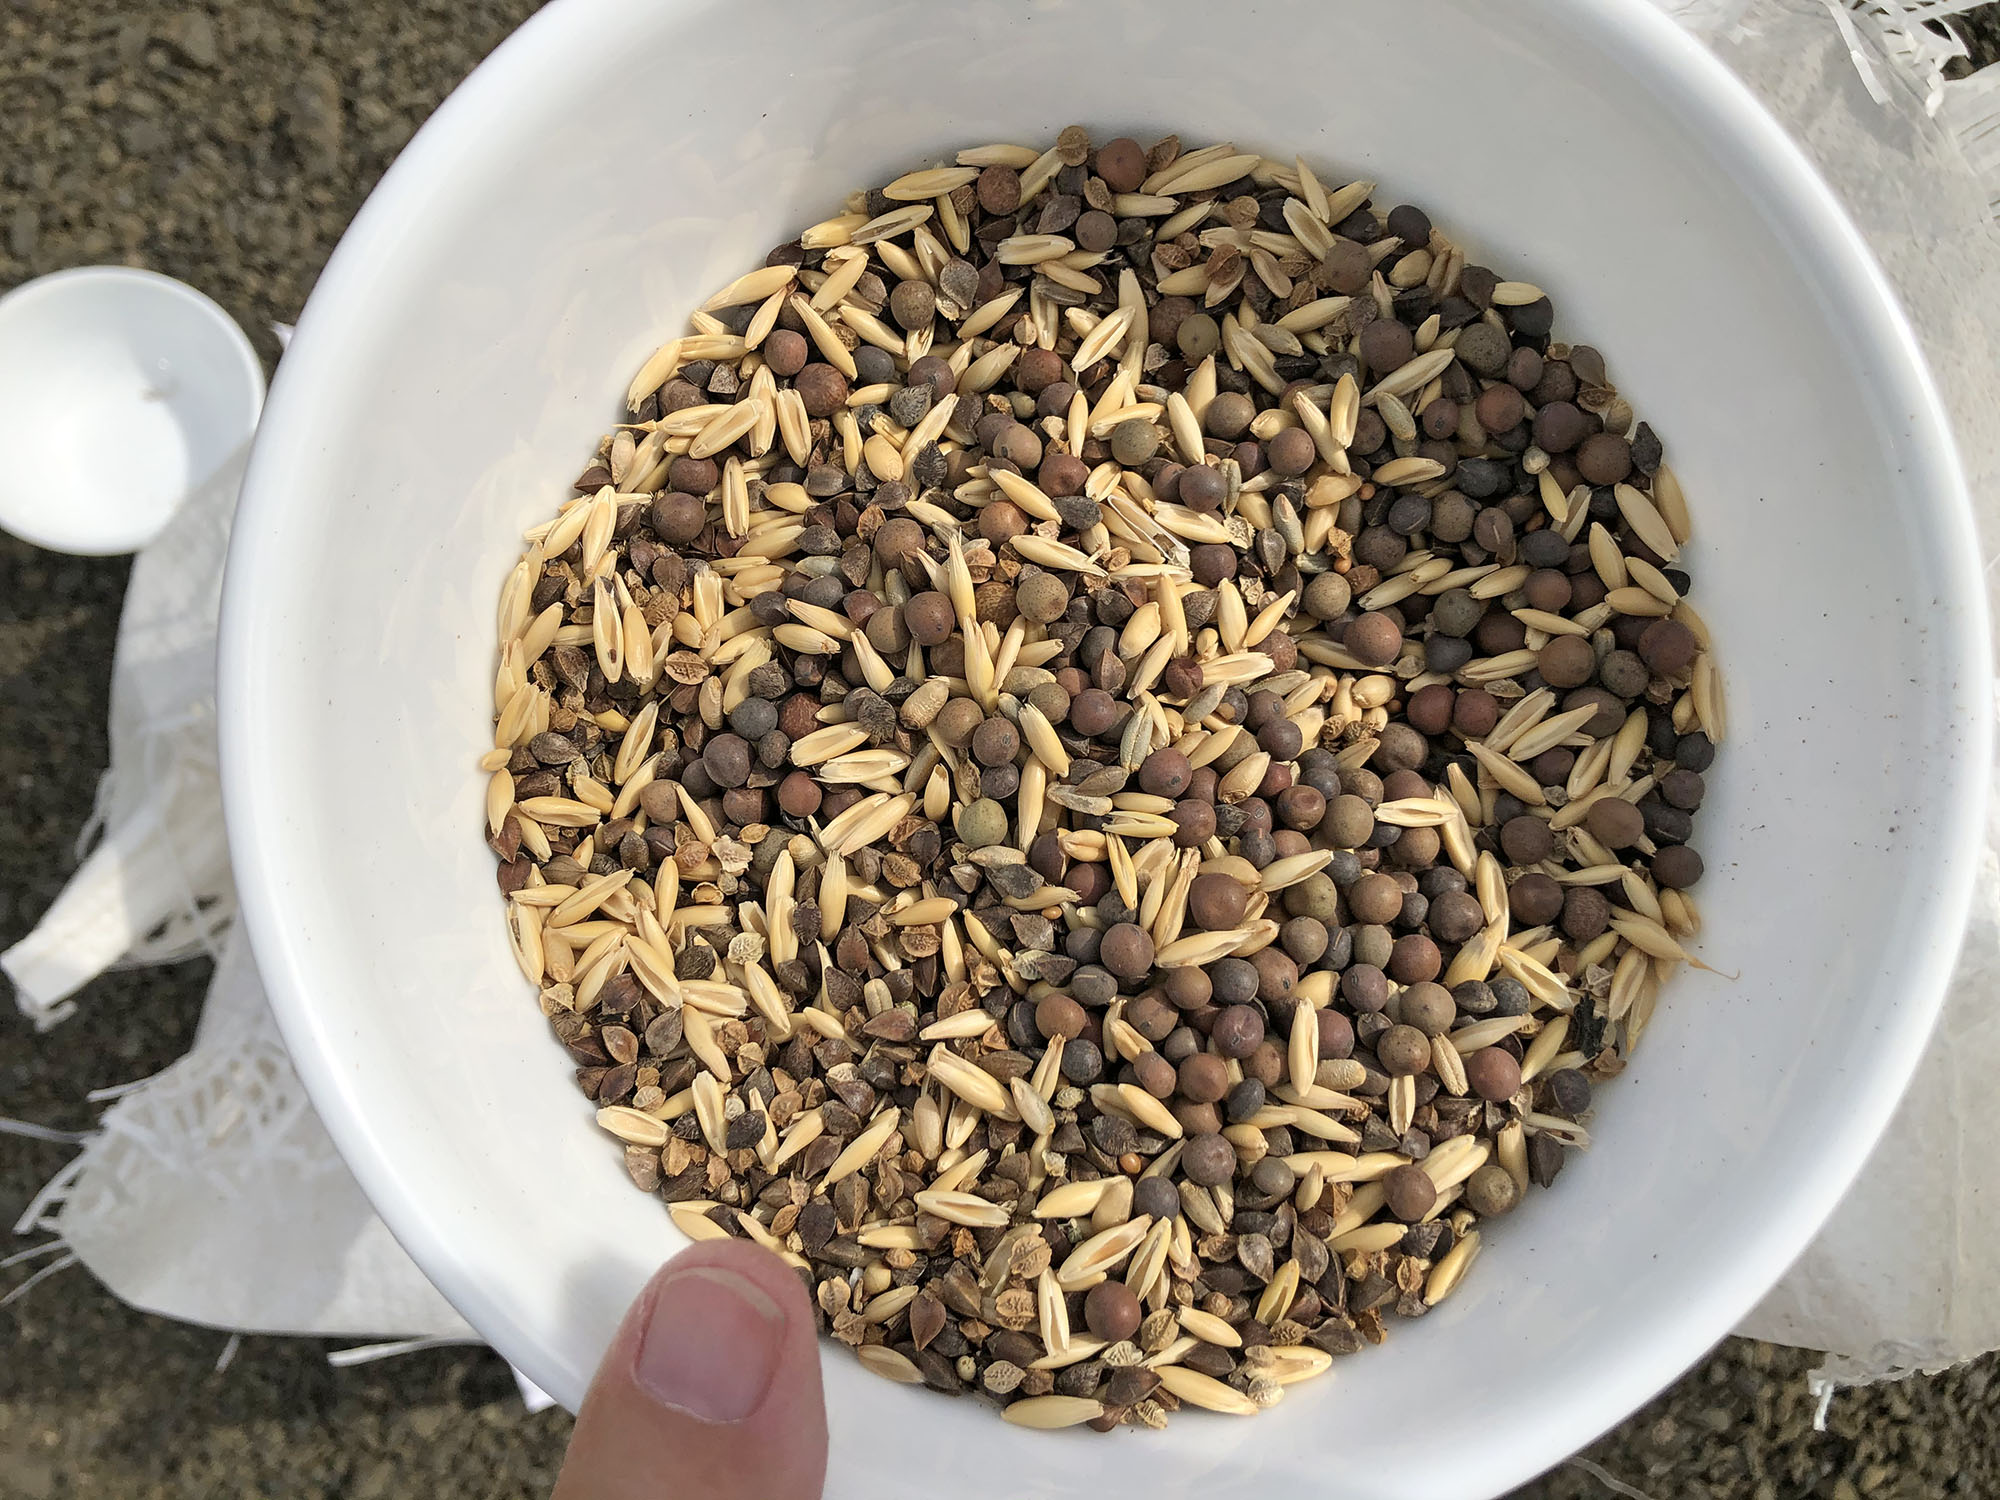 The seeds in this bowl were the start of this year's wildflower garden that has been supporting pollinators and providing food for a variety of animals.